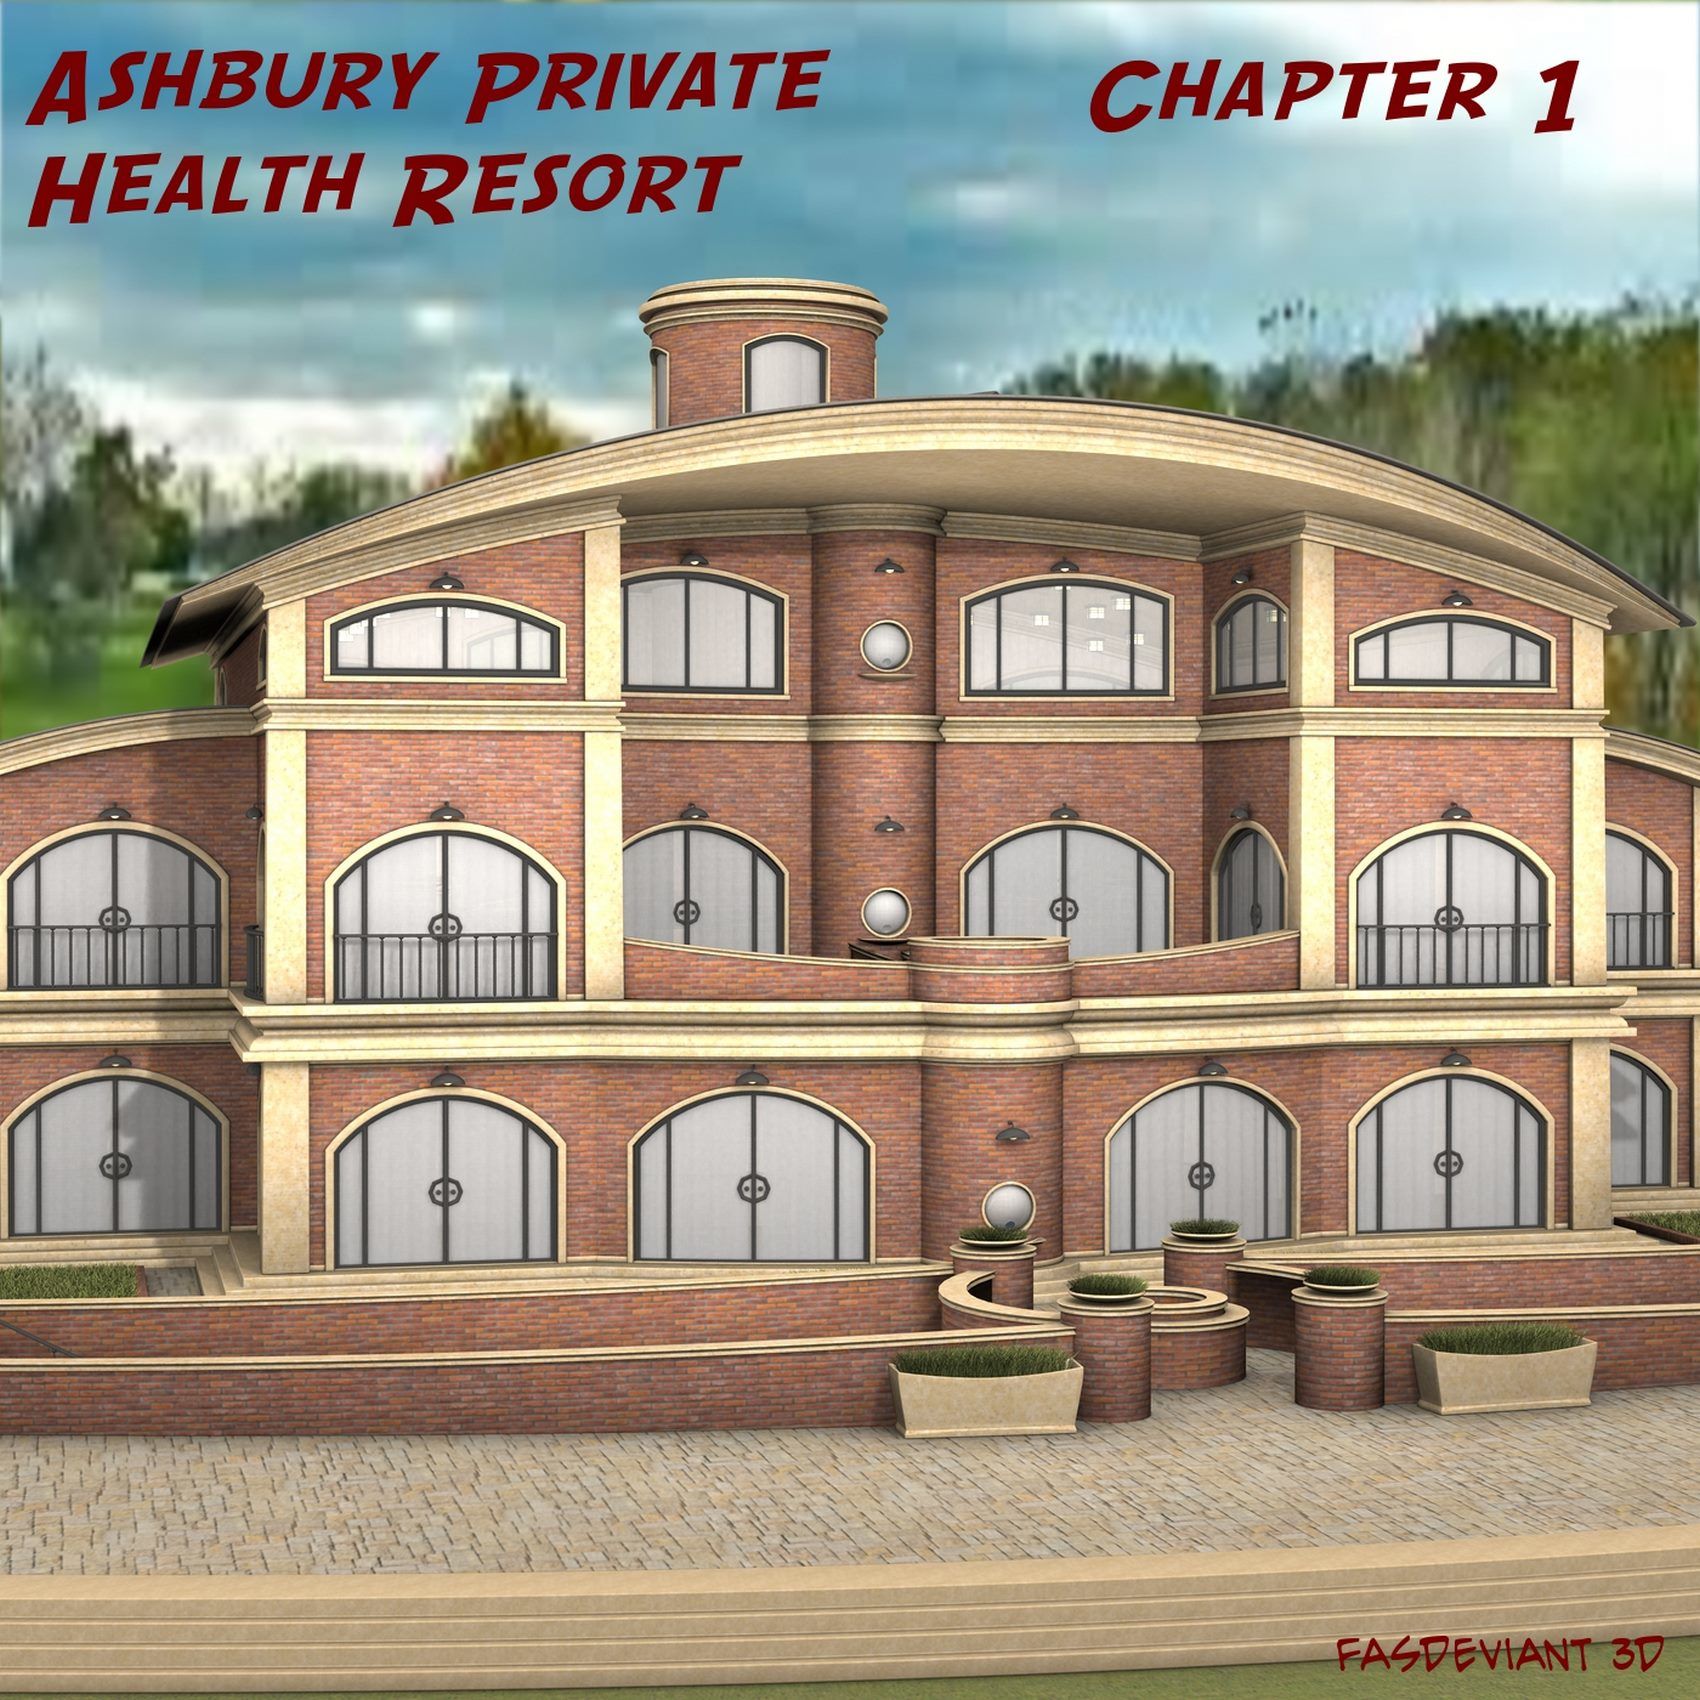 Ashbury Private Health Resort Ch.1 FasDeviant 3D page 1